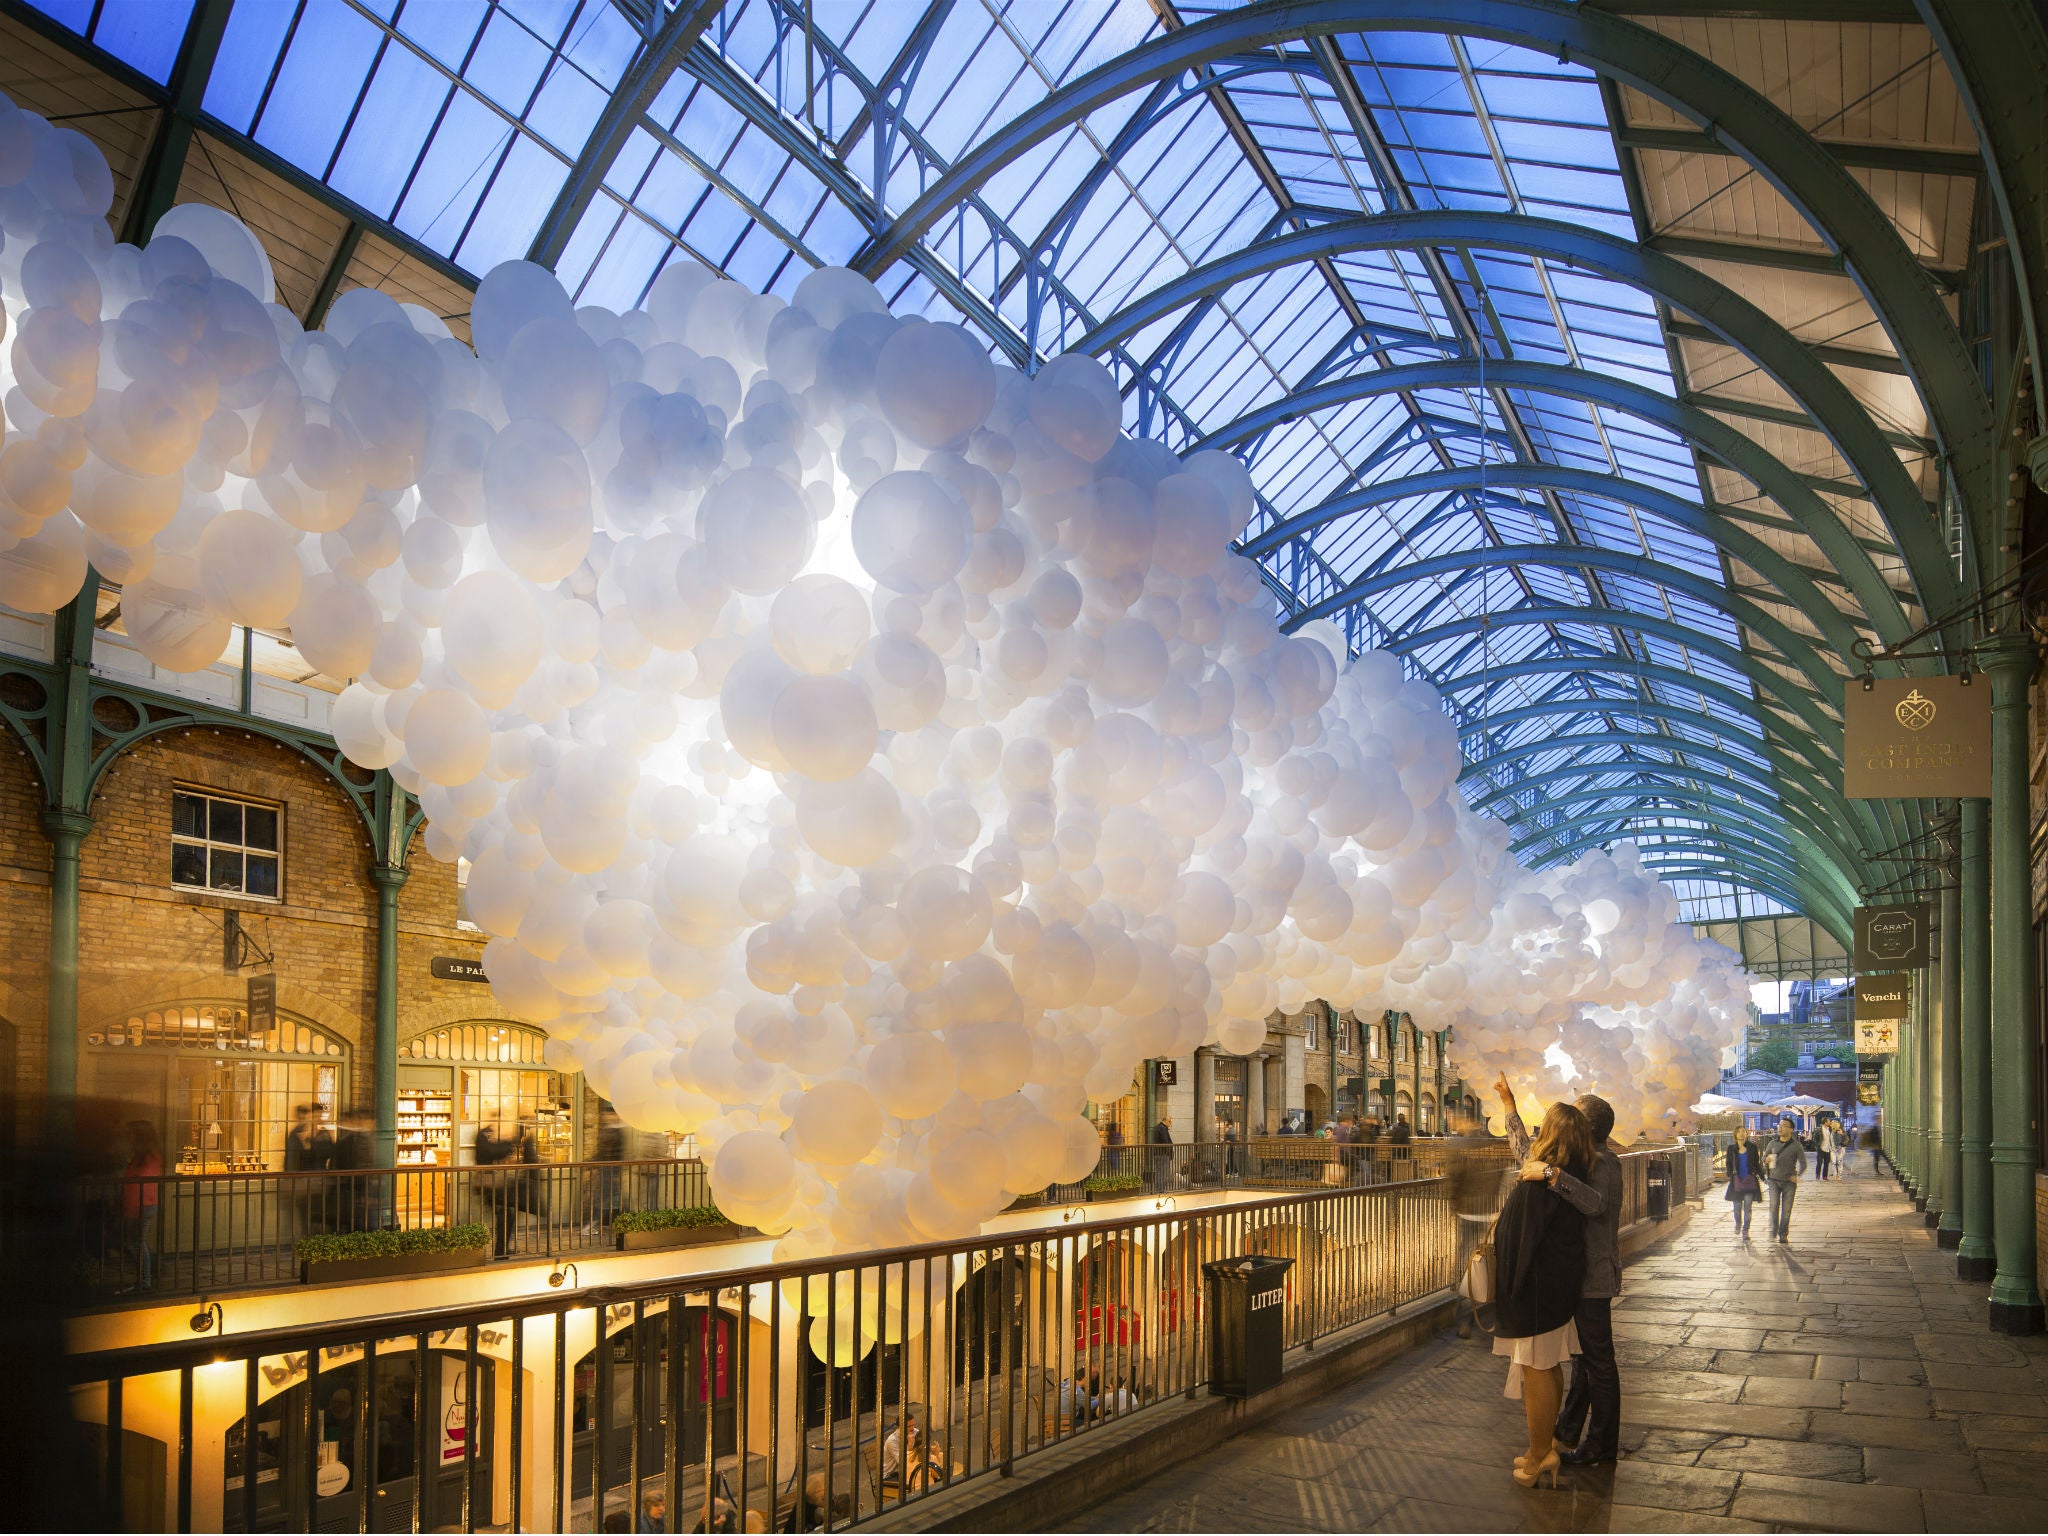 Charles Petillon's 'Heartbeat' installation will pop up in Covent Garden later this month